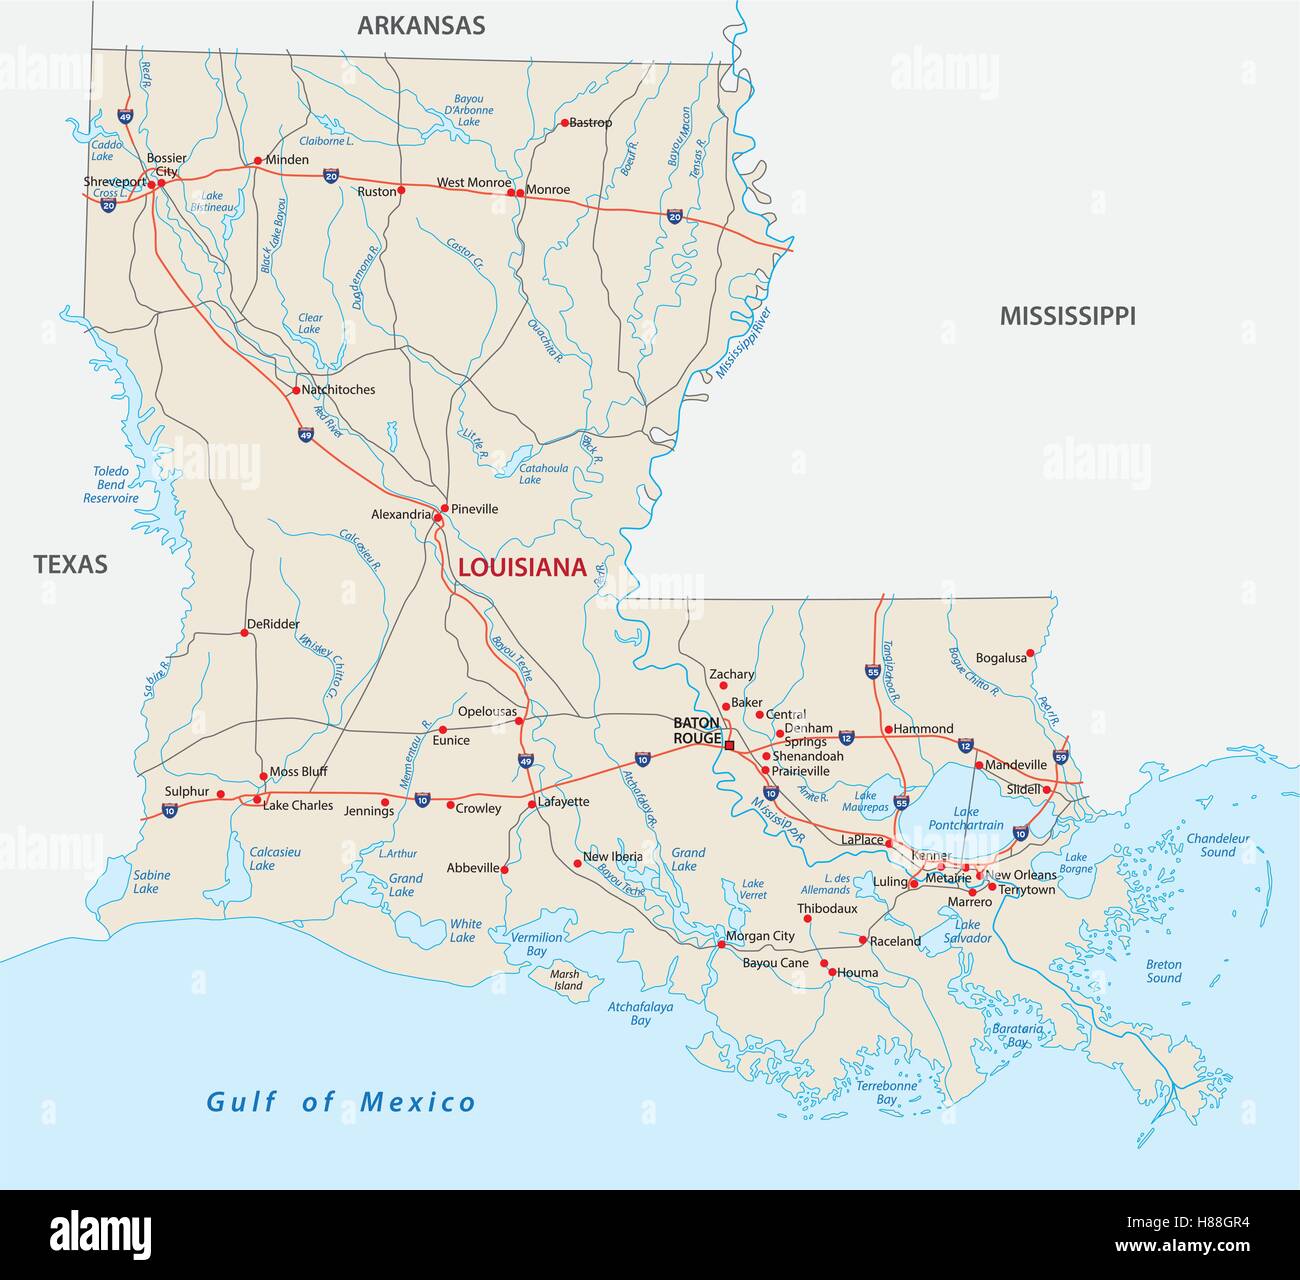 road map of louisiana and mississippi